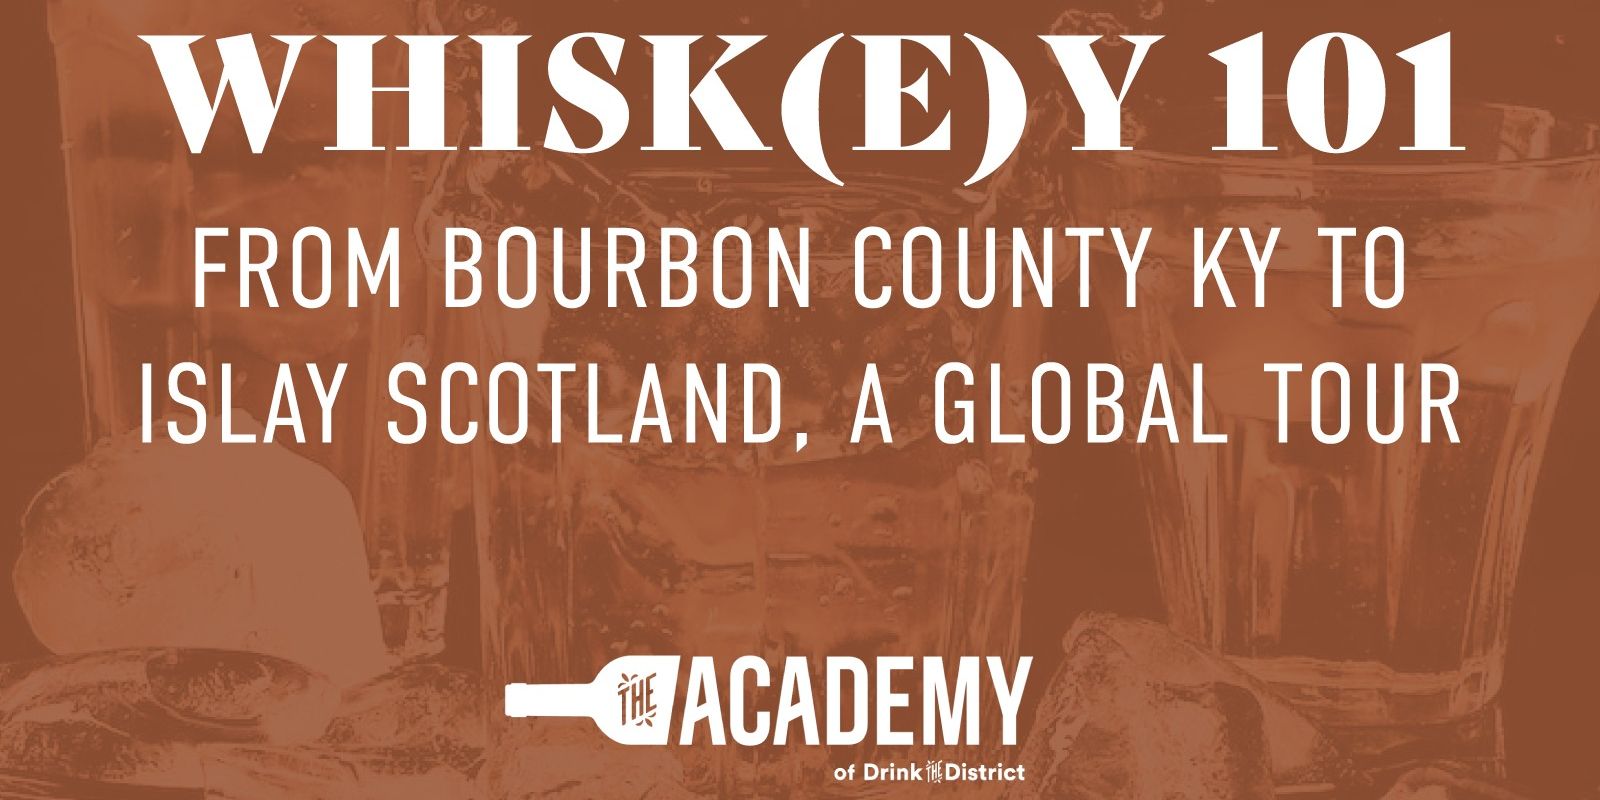 Whisk(e)y 101: From Bourbon County KY to Islay Scotland, A Global Tour promotional image